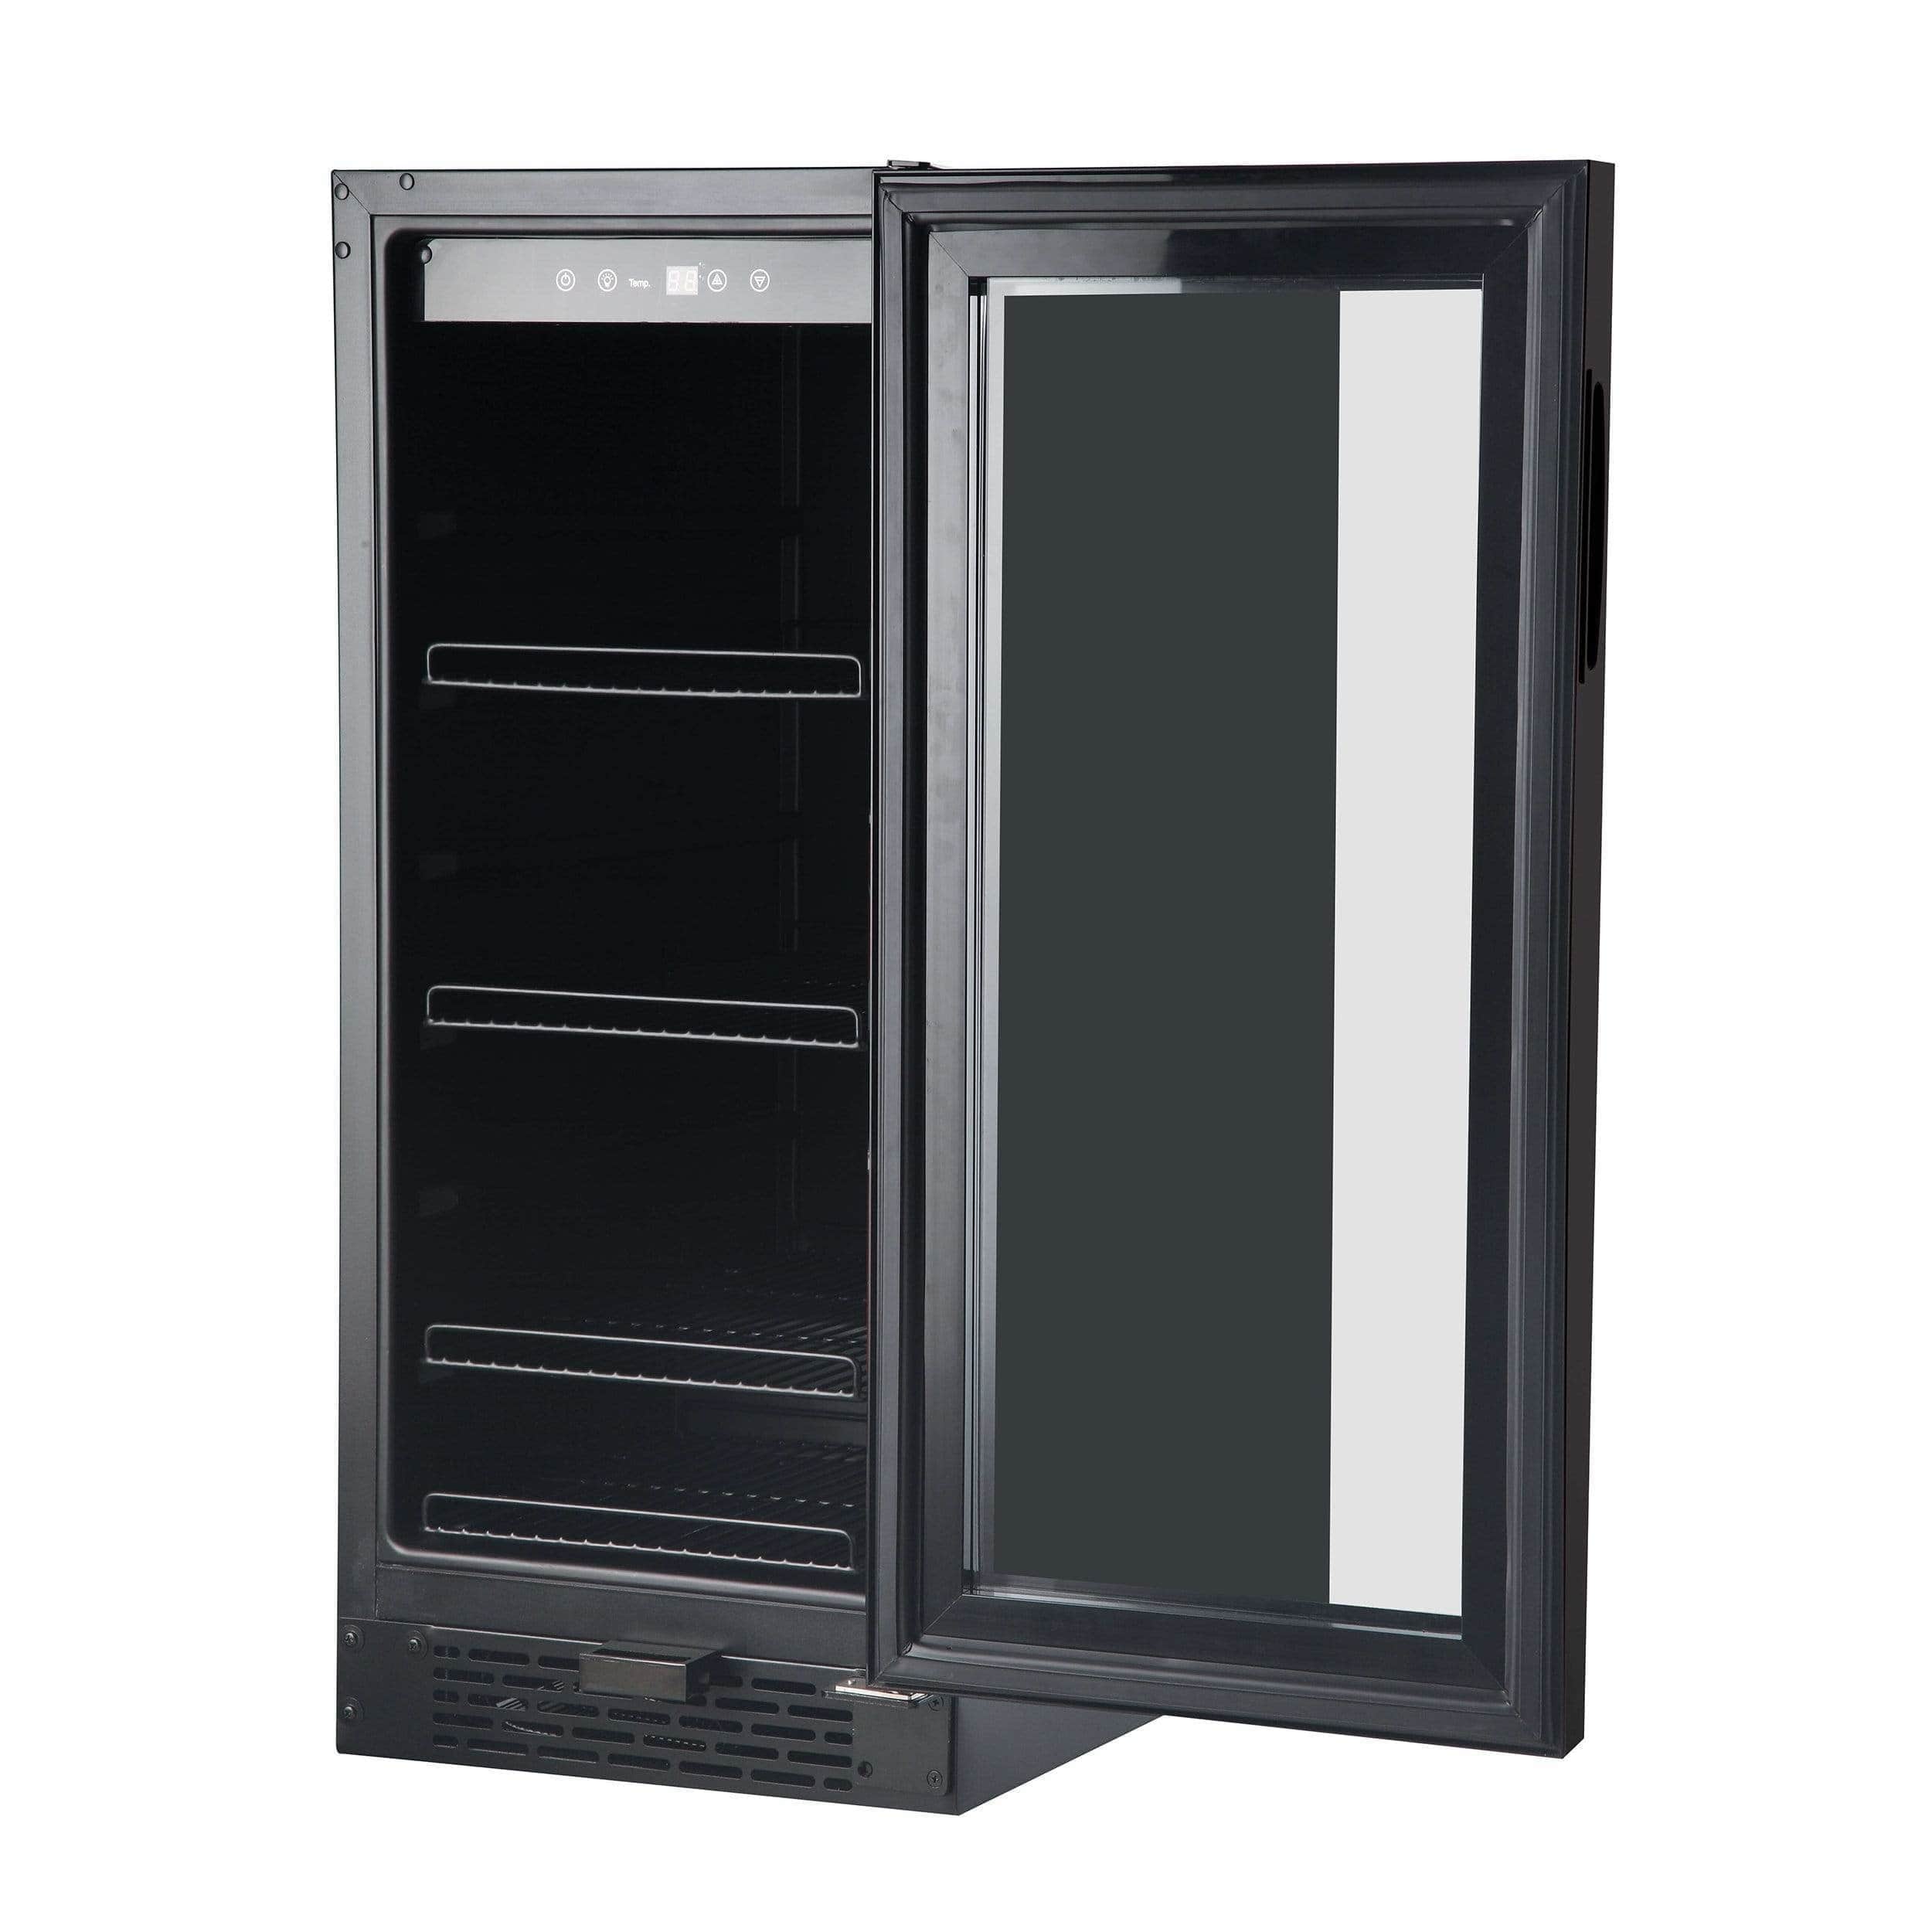 Whynter Built-in Black Glass 80-can capacity 3.4 cu ft. Beverage Refrigerator BBR-801BG Wine Coolers Empire